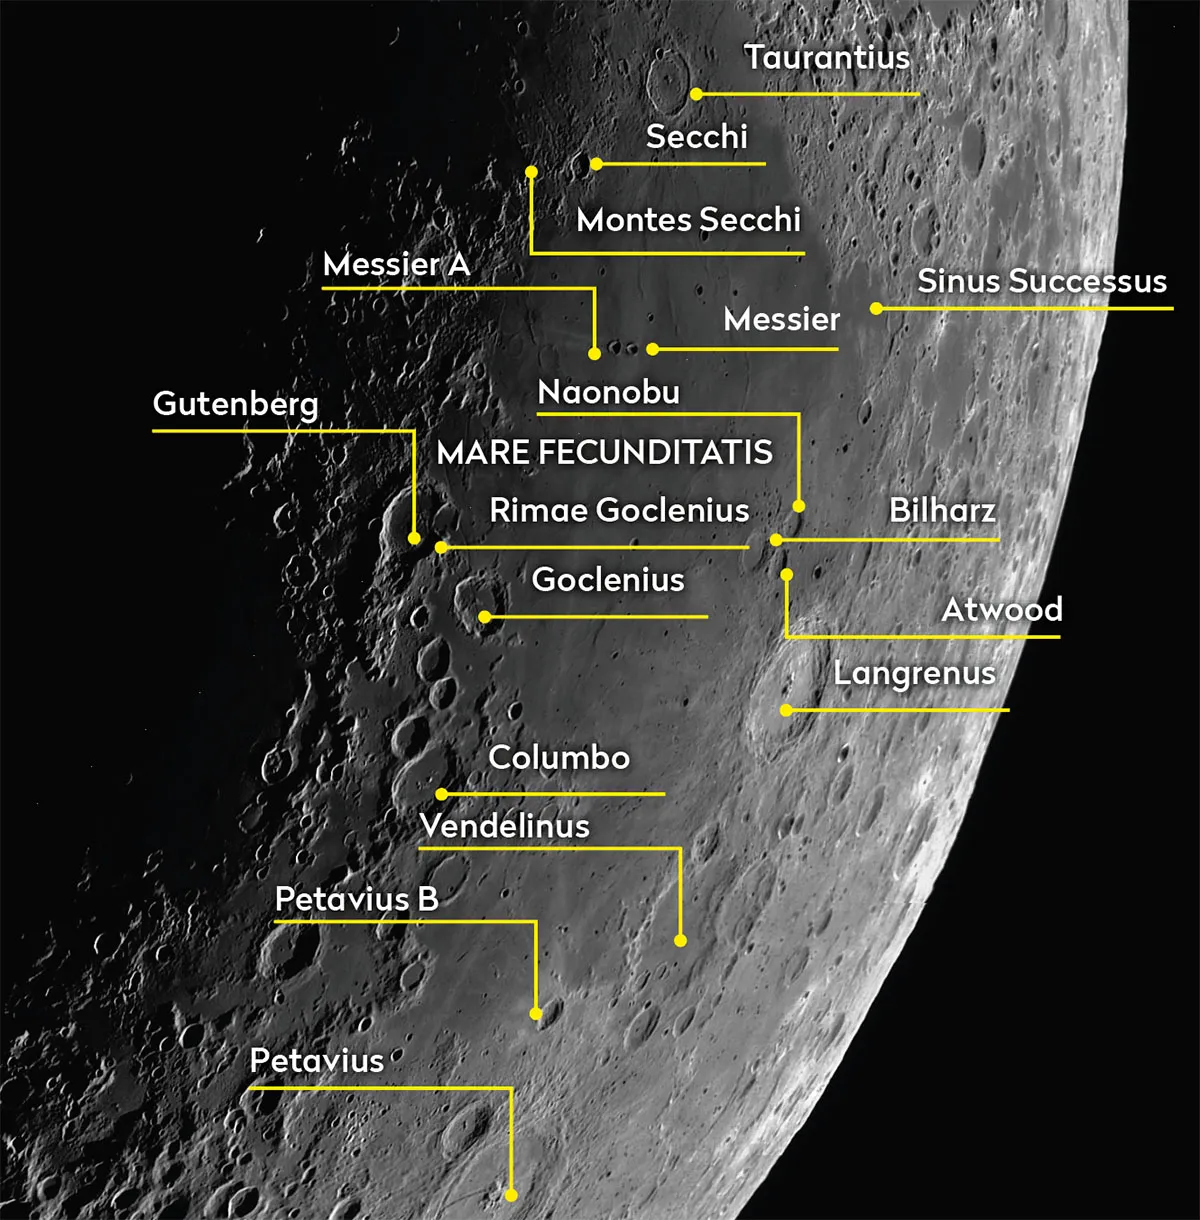 An annotated image of the region around Mare Fecunditatus on the Moon. Credit: Pete Lawrence